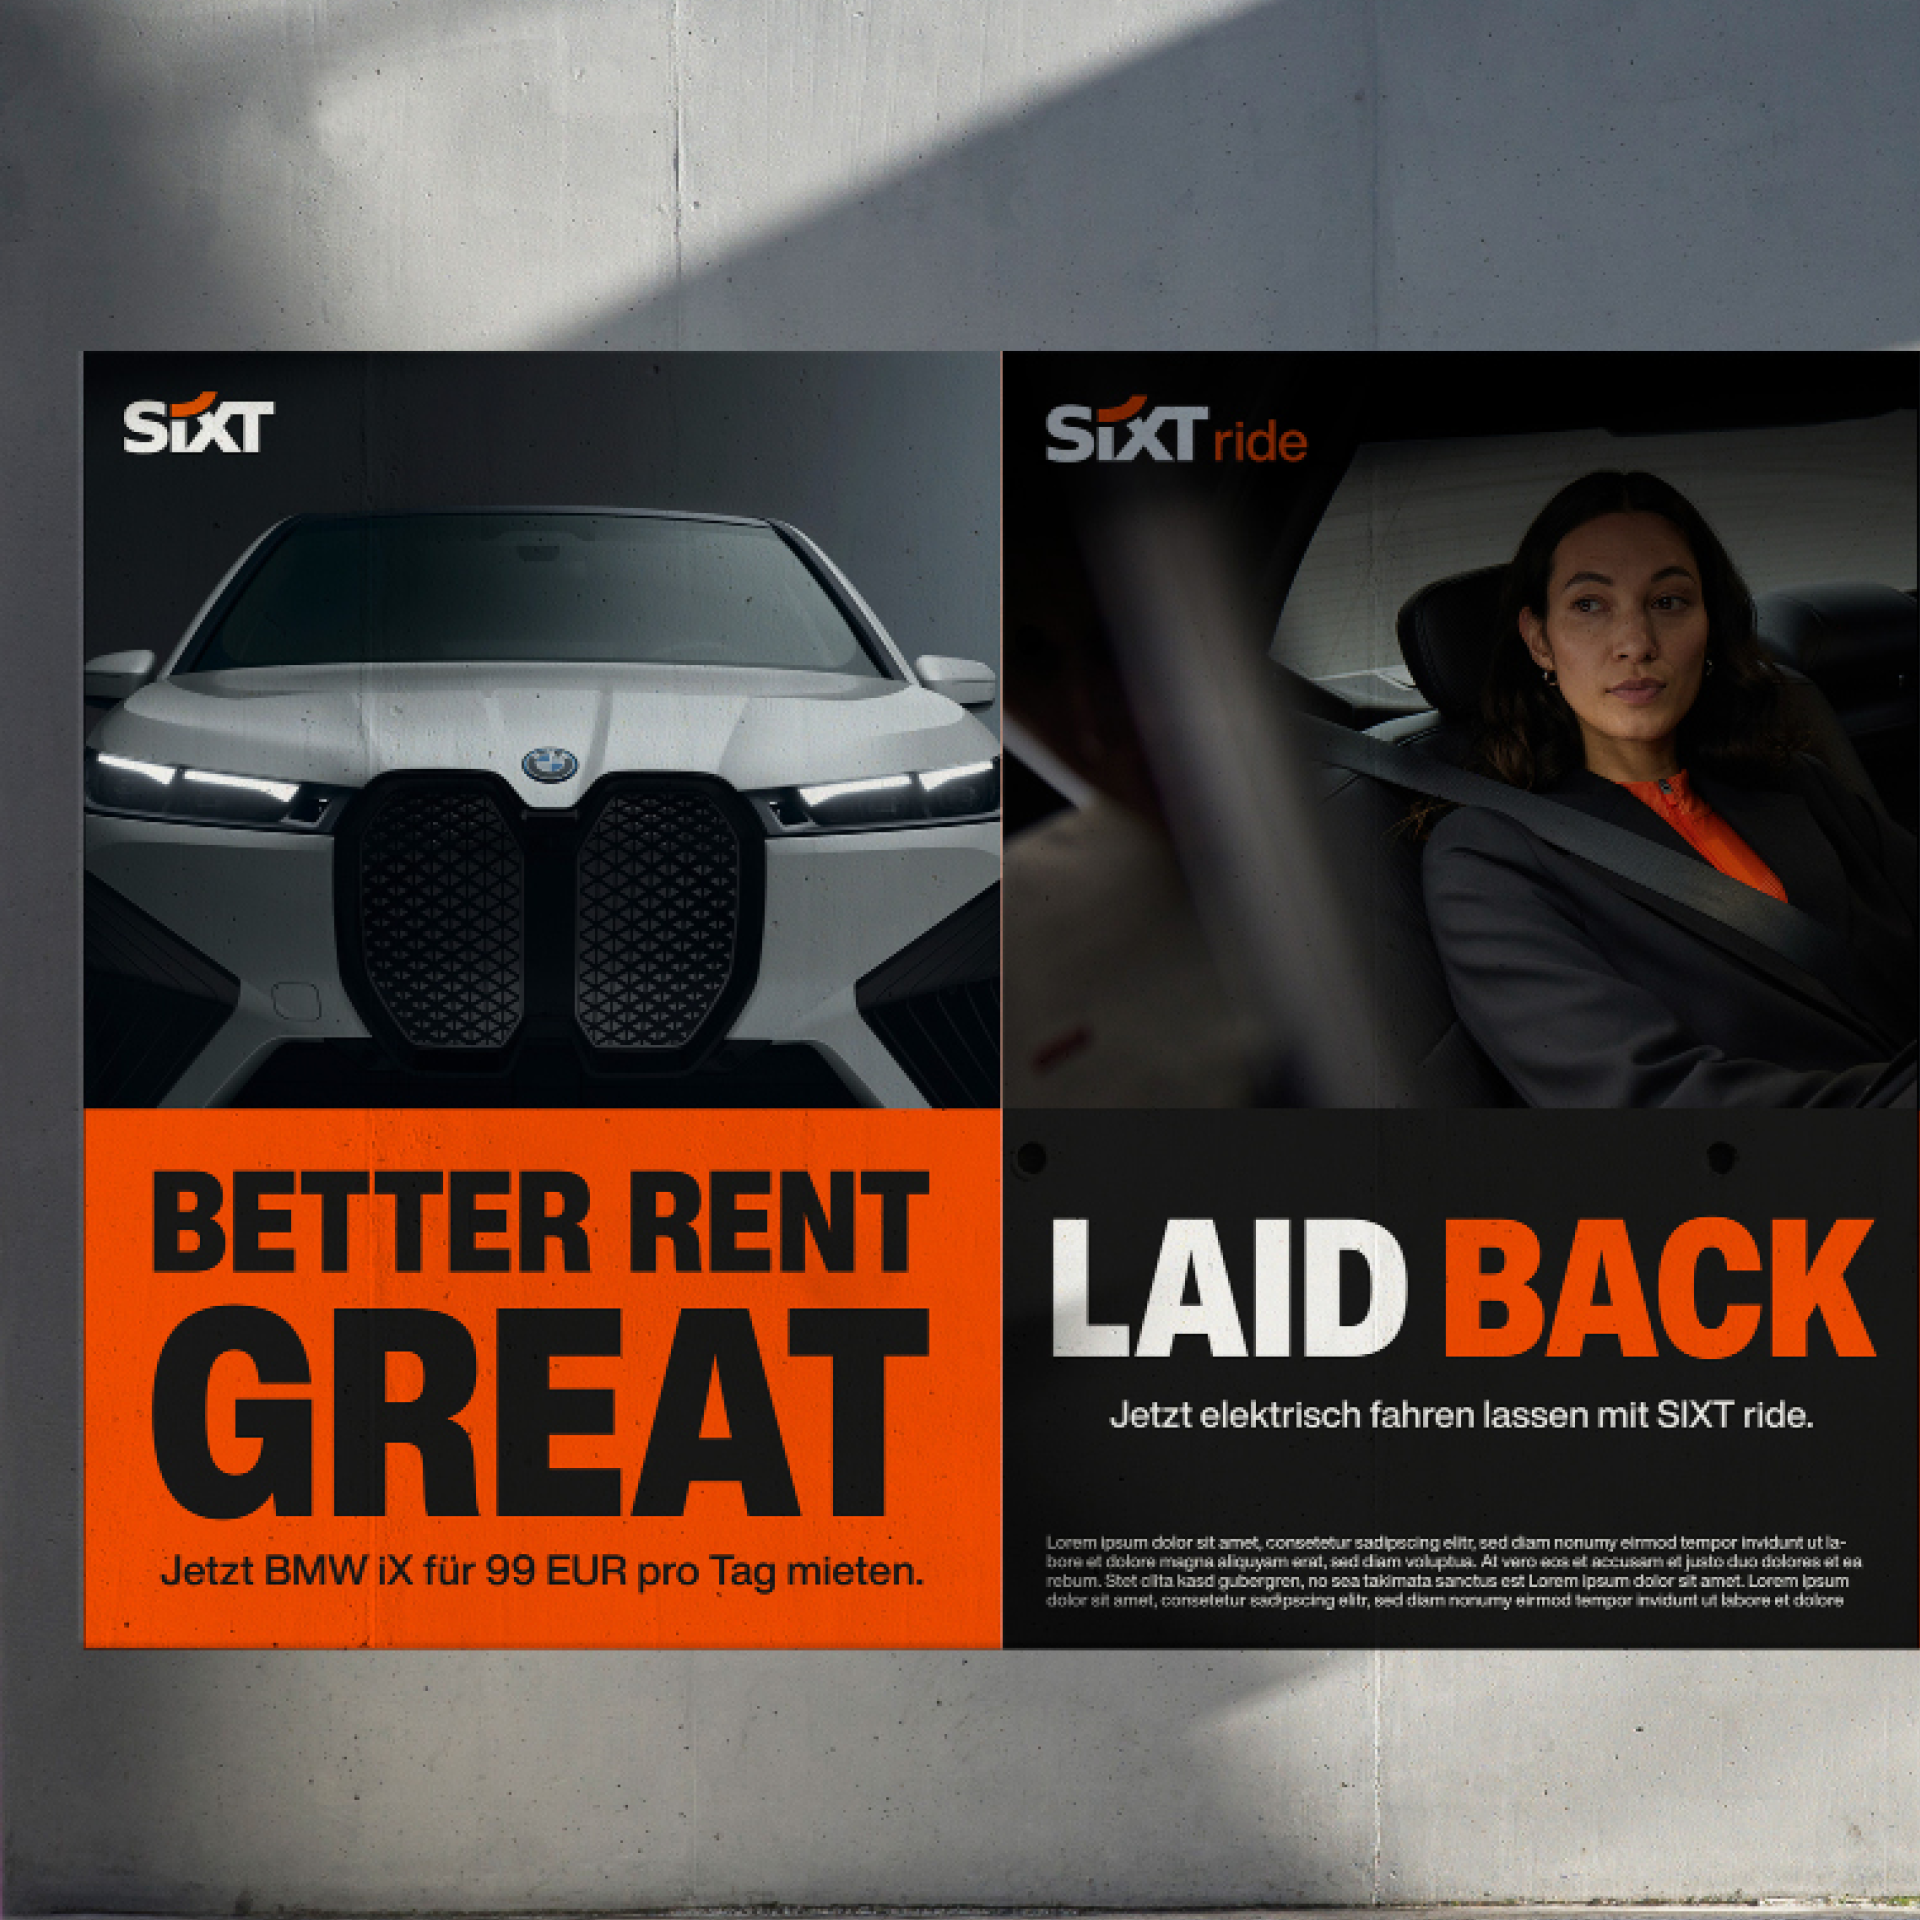 Four different SIXT ads executed in the new brand design by Jung von Matt BRAND IDENTITY, headlines: Better rent great, Laid back, Starten statt posen, Cars for free spirits